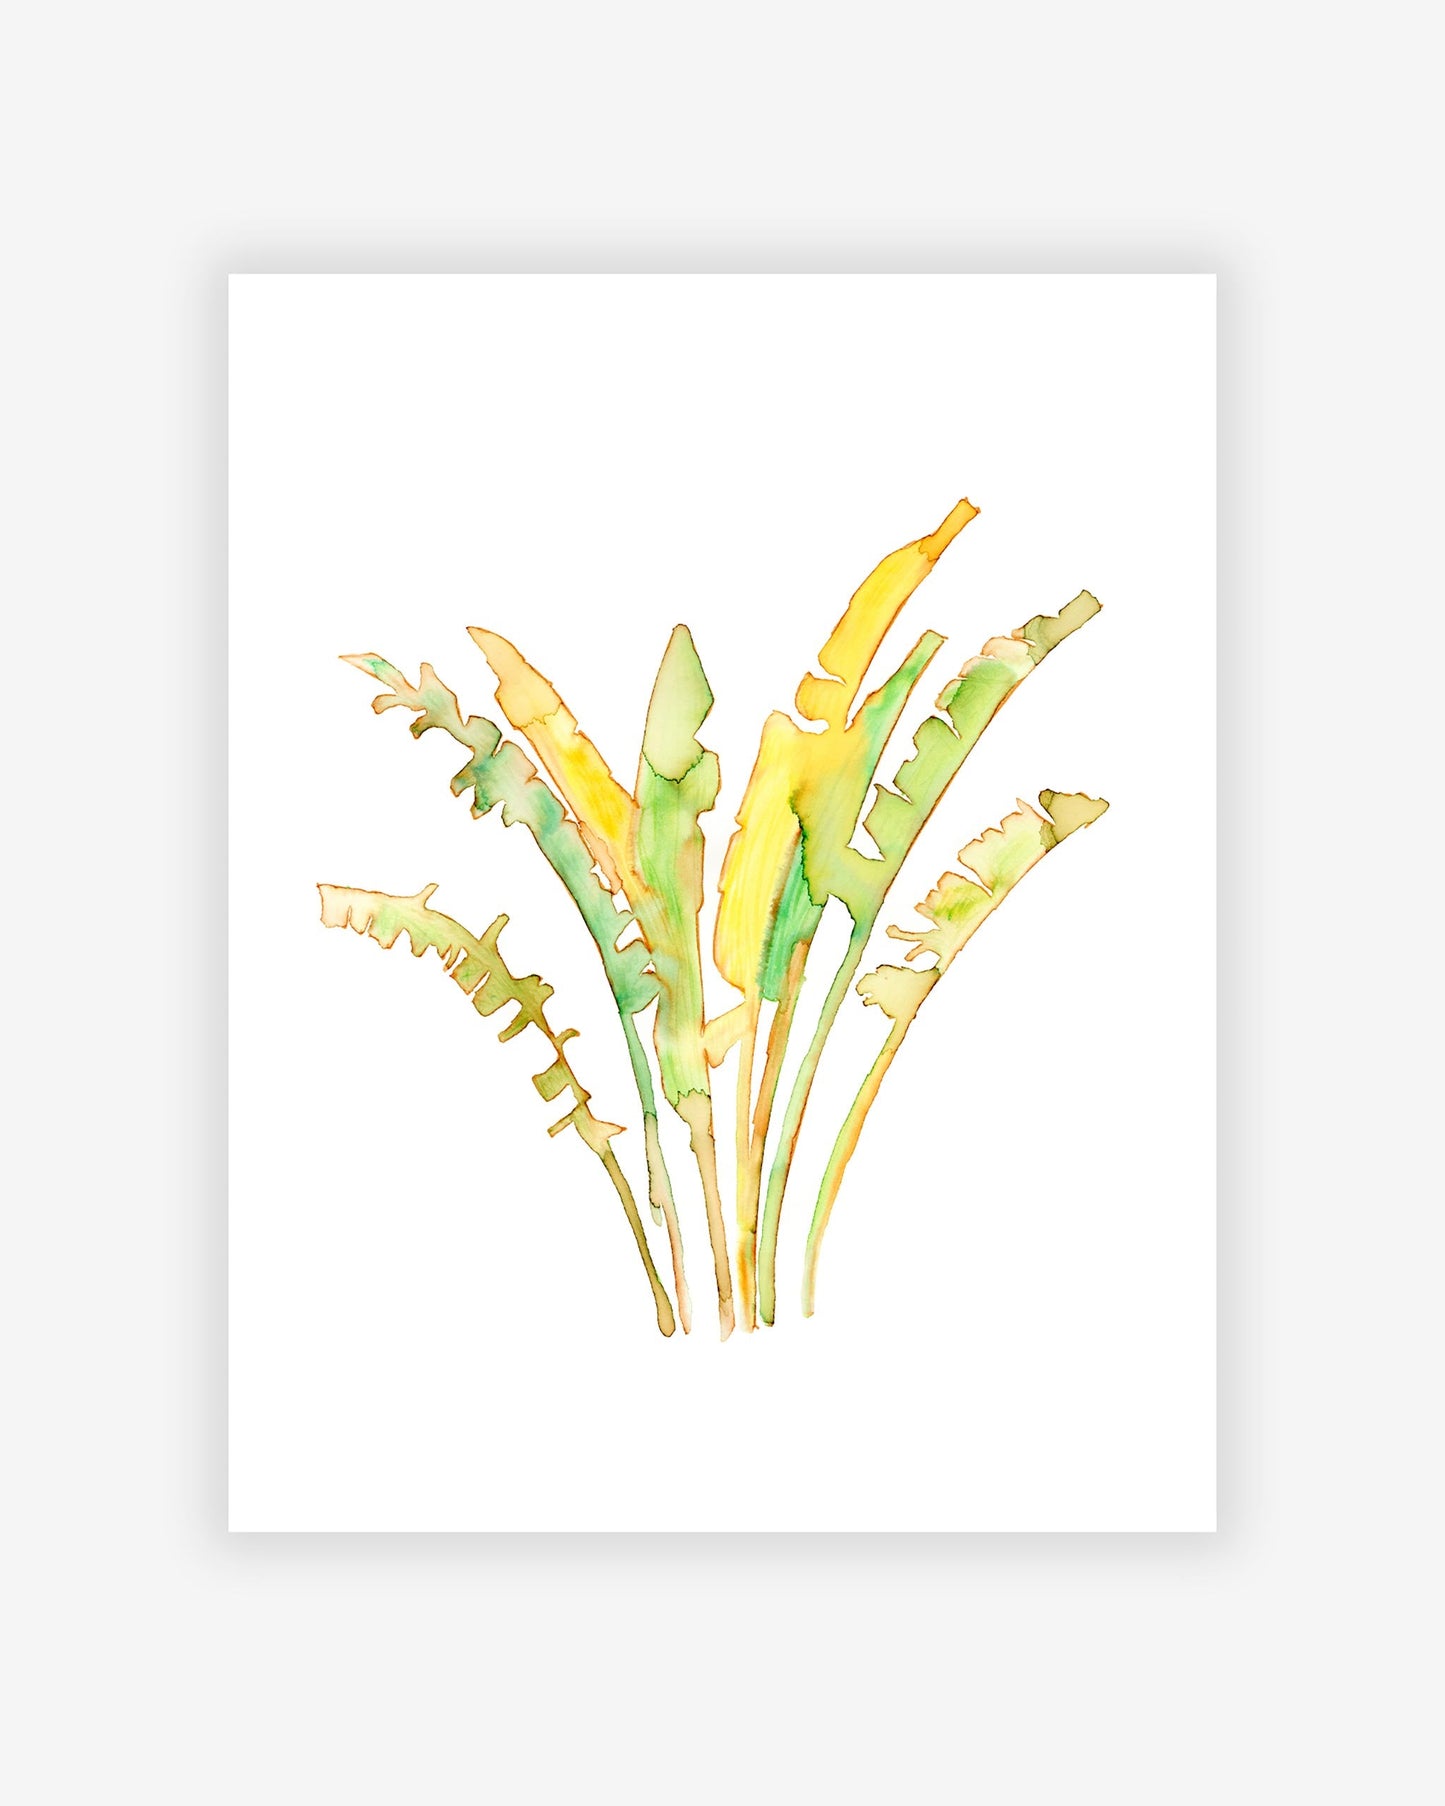 A Ravenala Print by the Artist of a banana plant on a white background